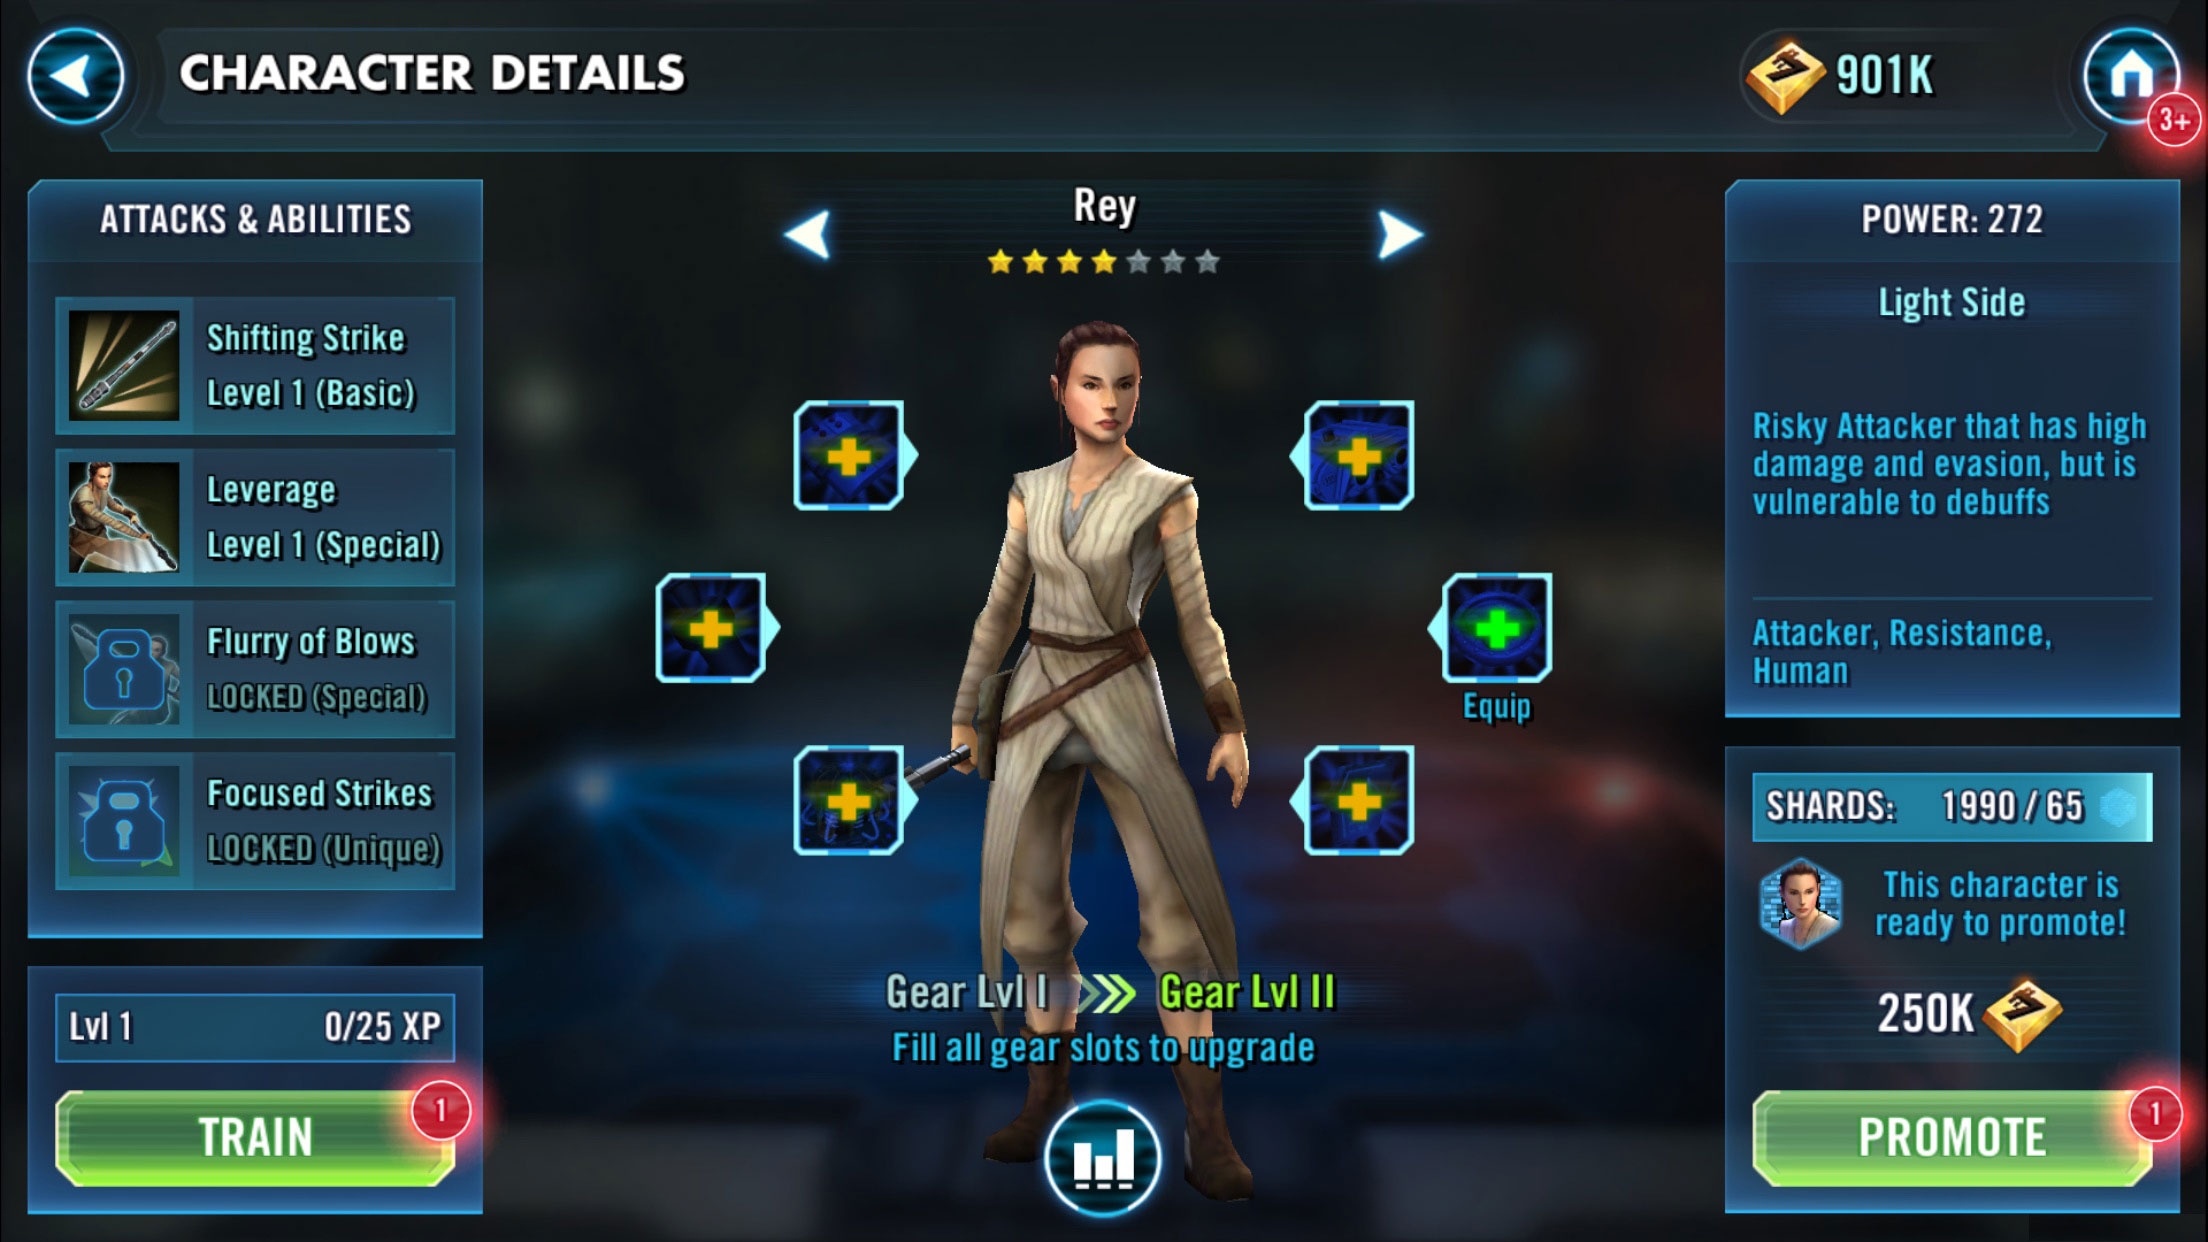 How Stars Wars Mobile Games Are Celebrating The Force Awakens